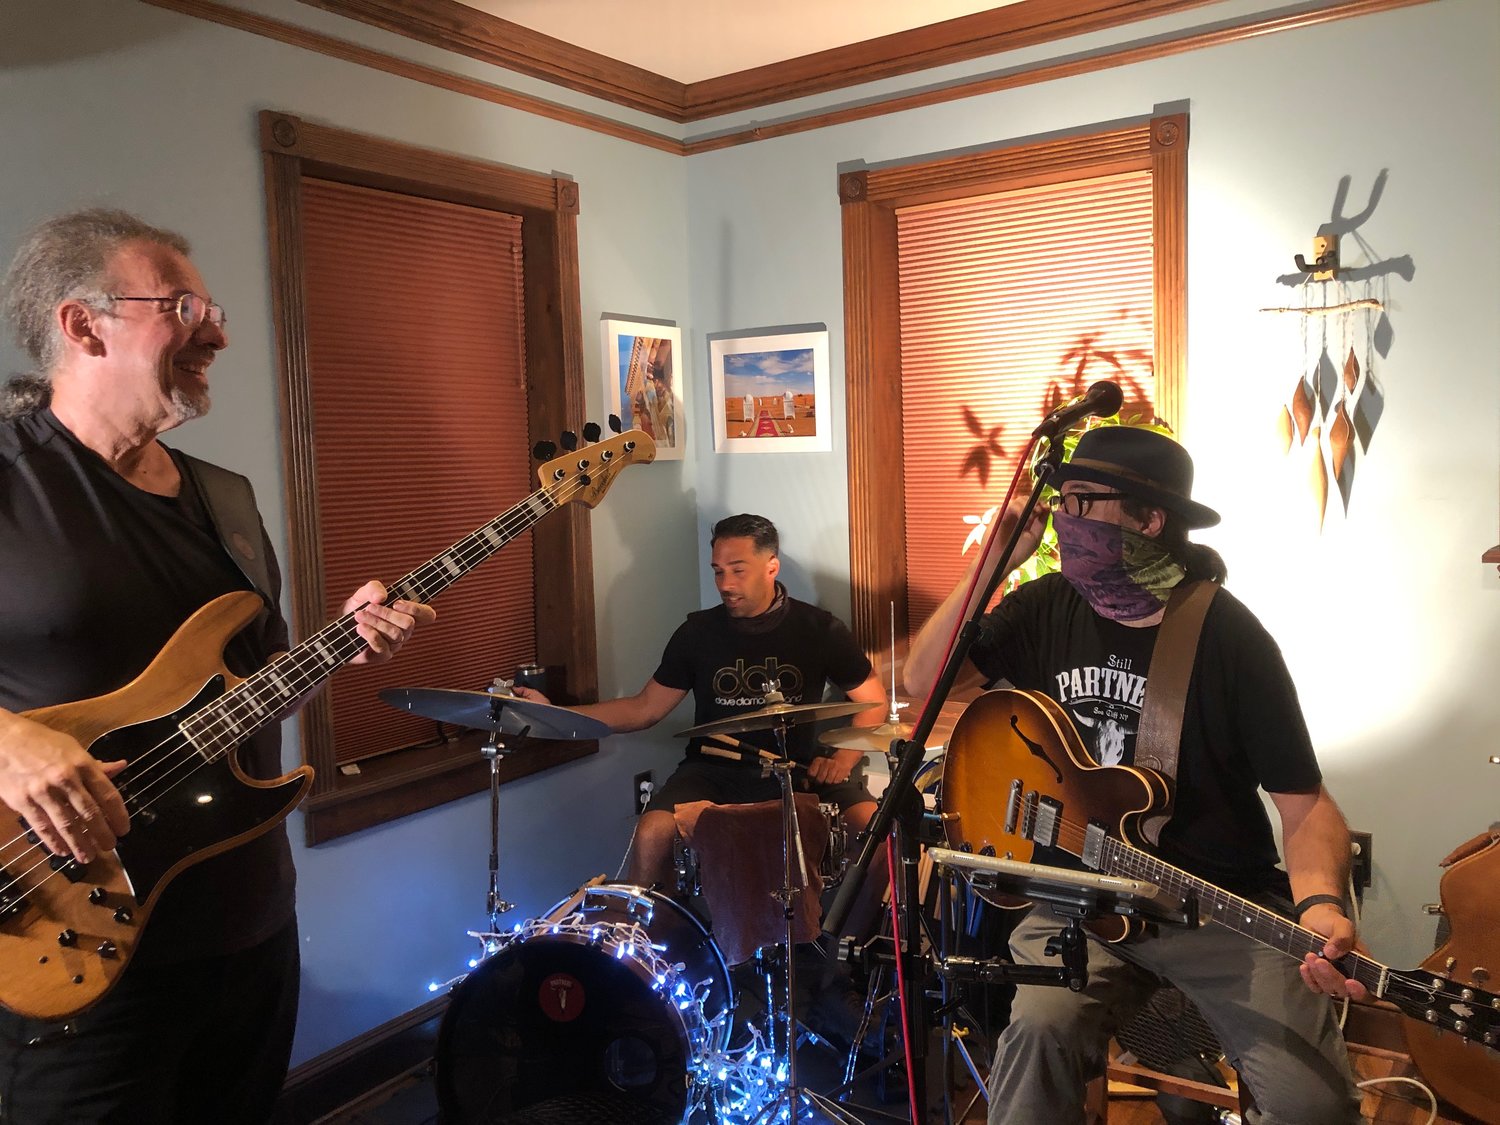 The Dave Diamond band, made up of bassist Craig Pivett, left, drummer Adam Polatov and guitarist Dave Diamond, took the stage as the fourth act in the Still Partners fundraiser to save one of their favorite venues.